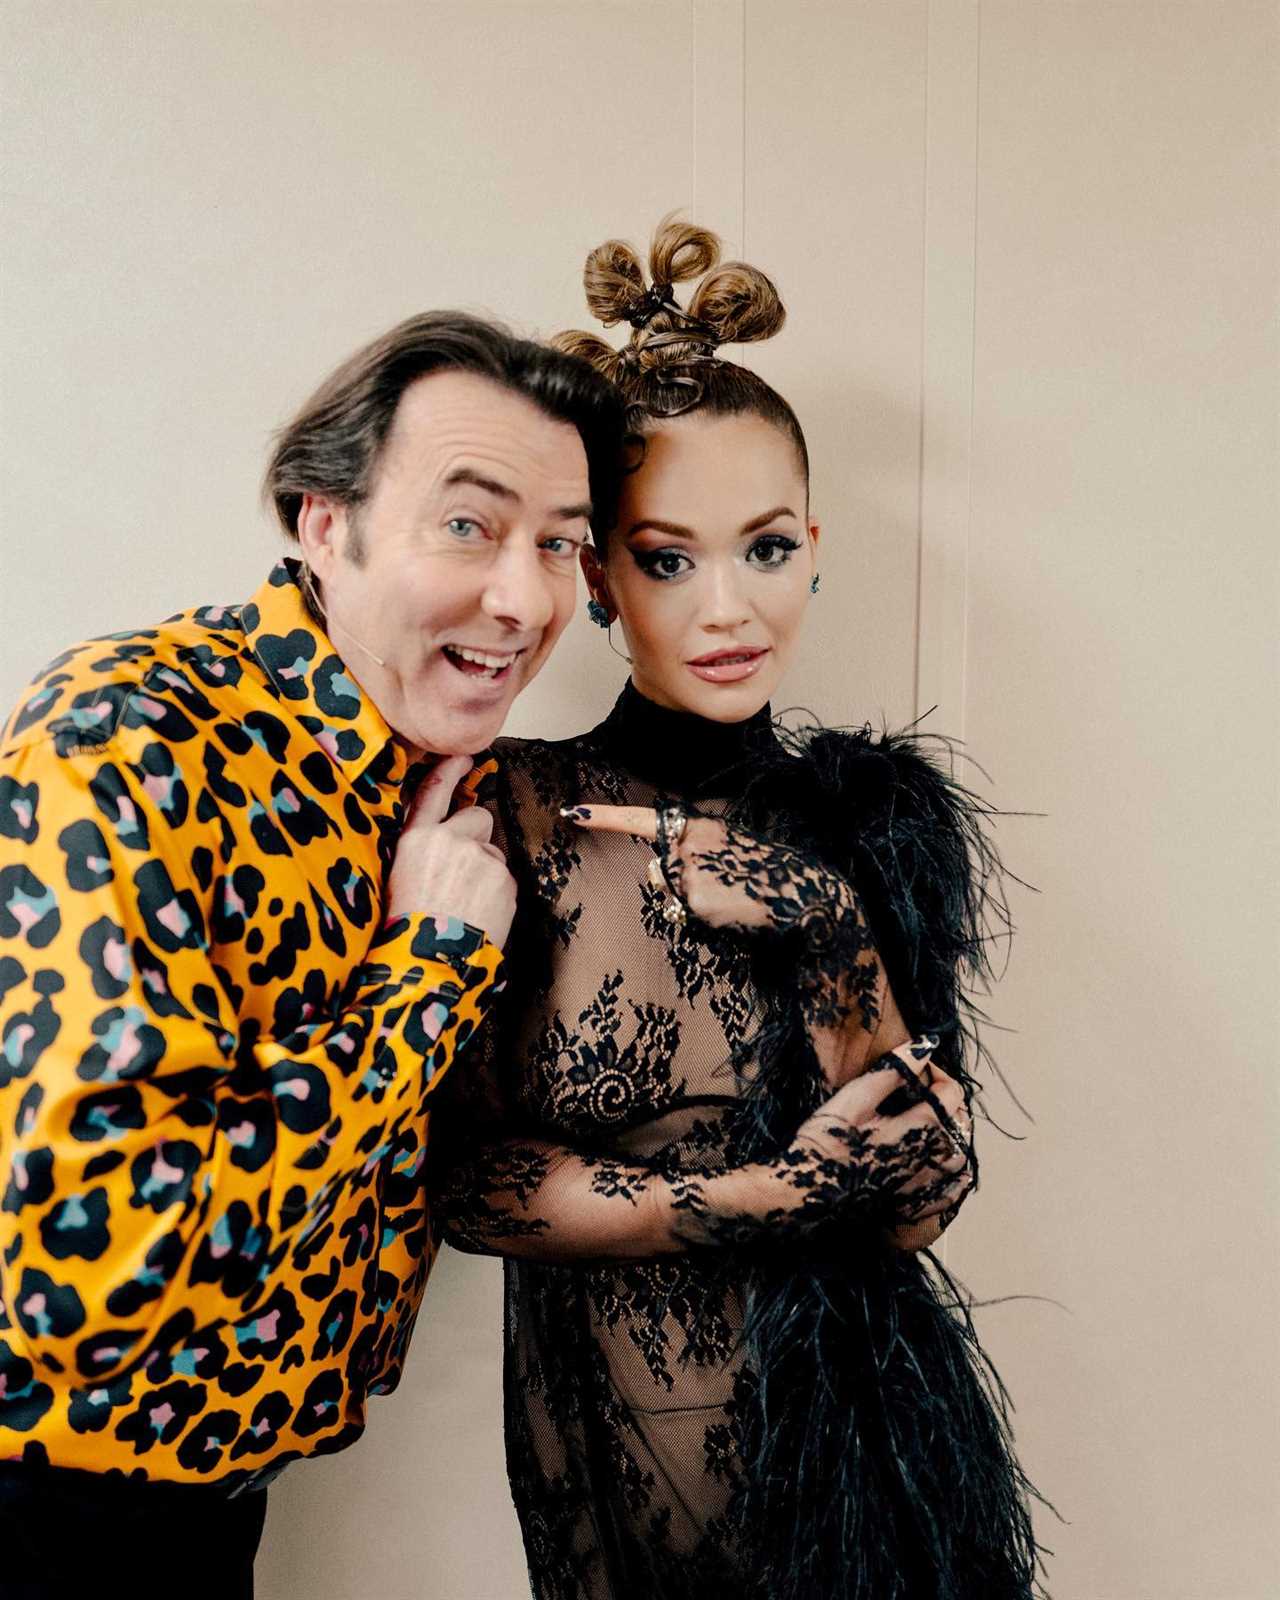 Rita Ora drives fans wild in sheer lace dress backstage at The Masked Singer